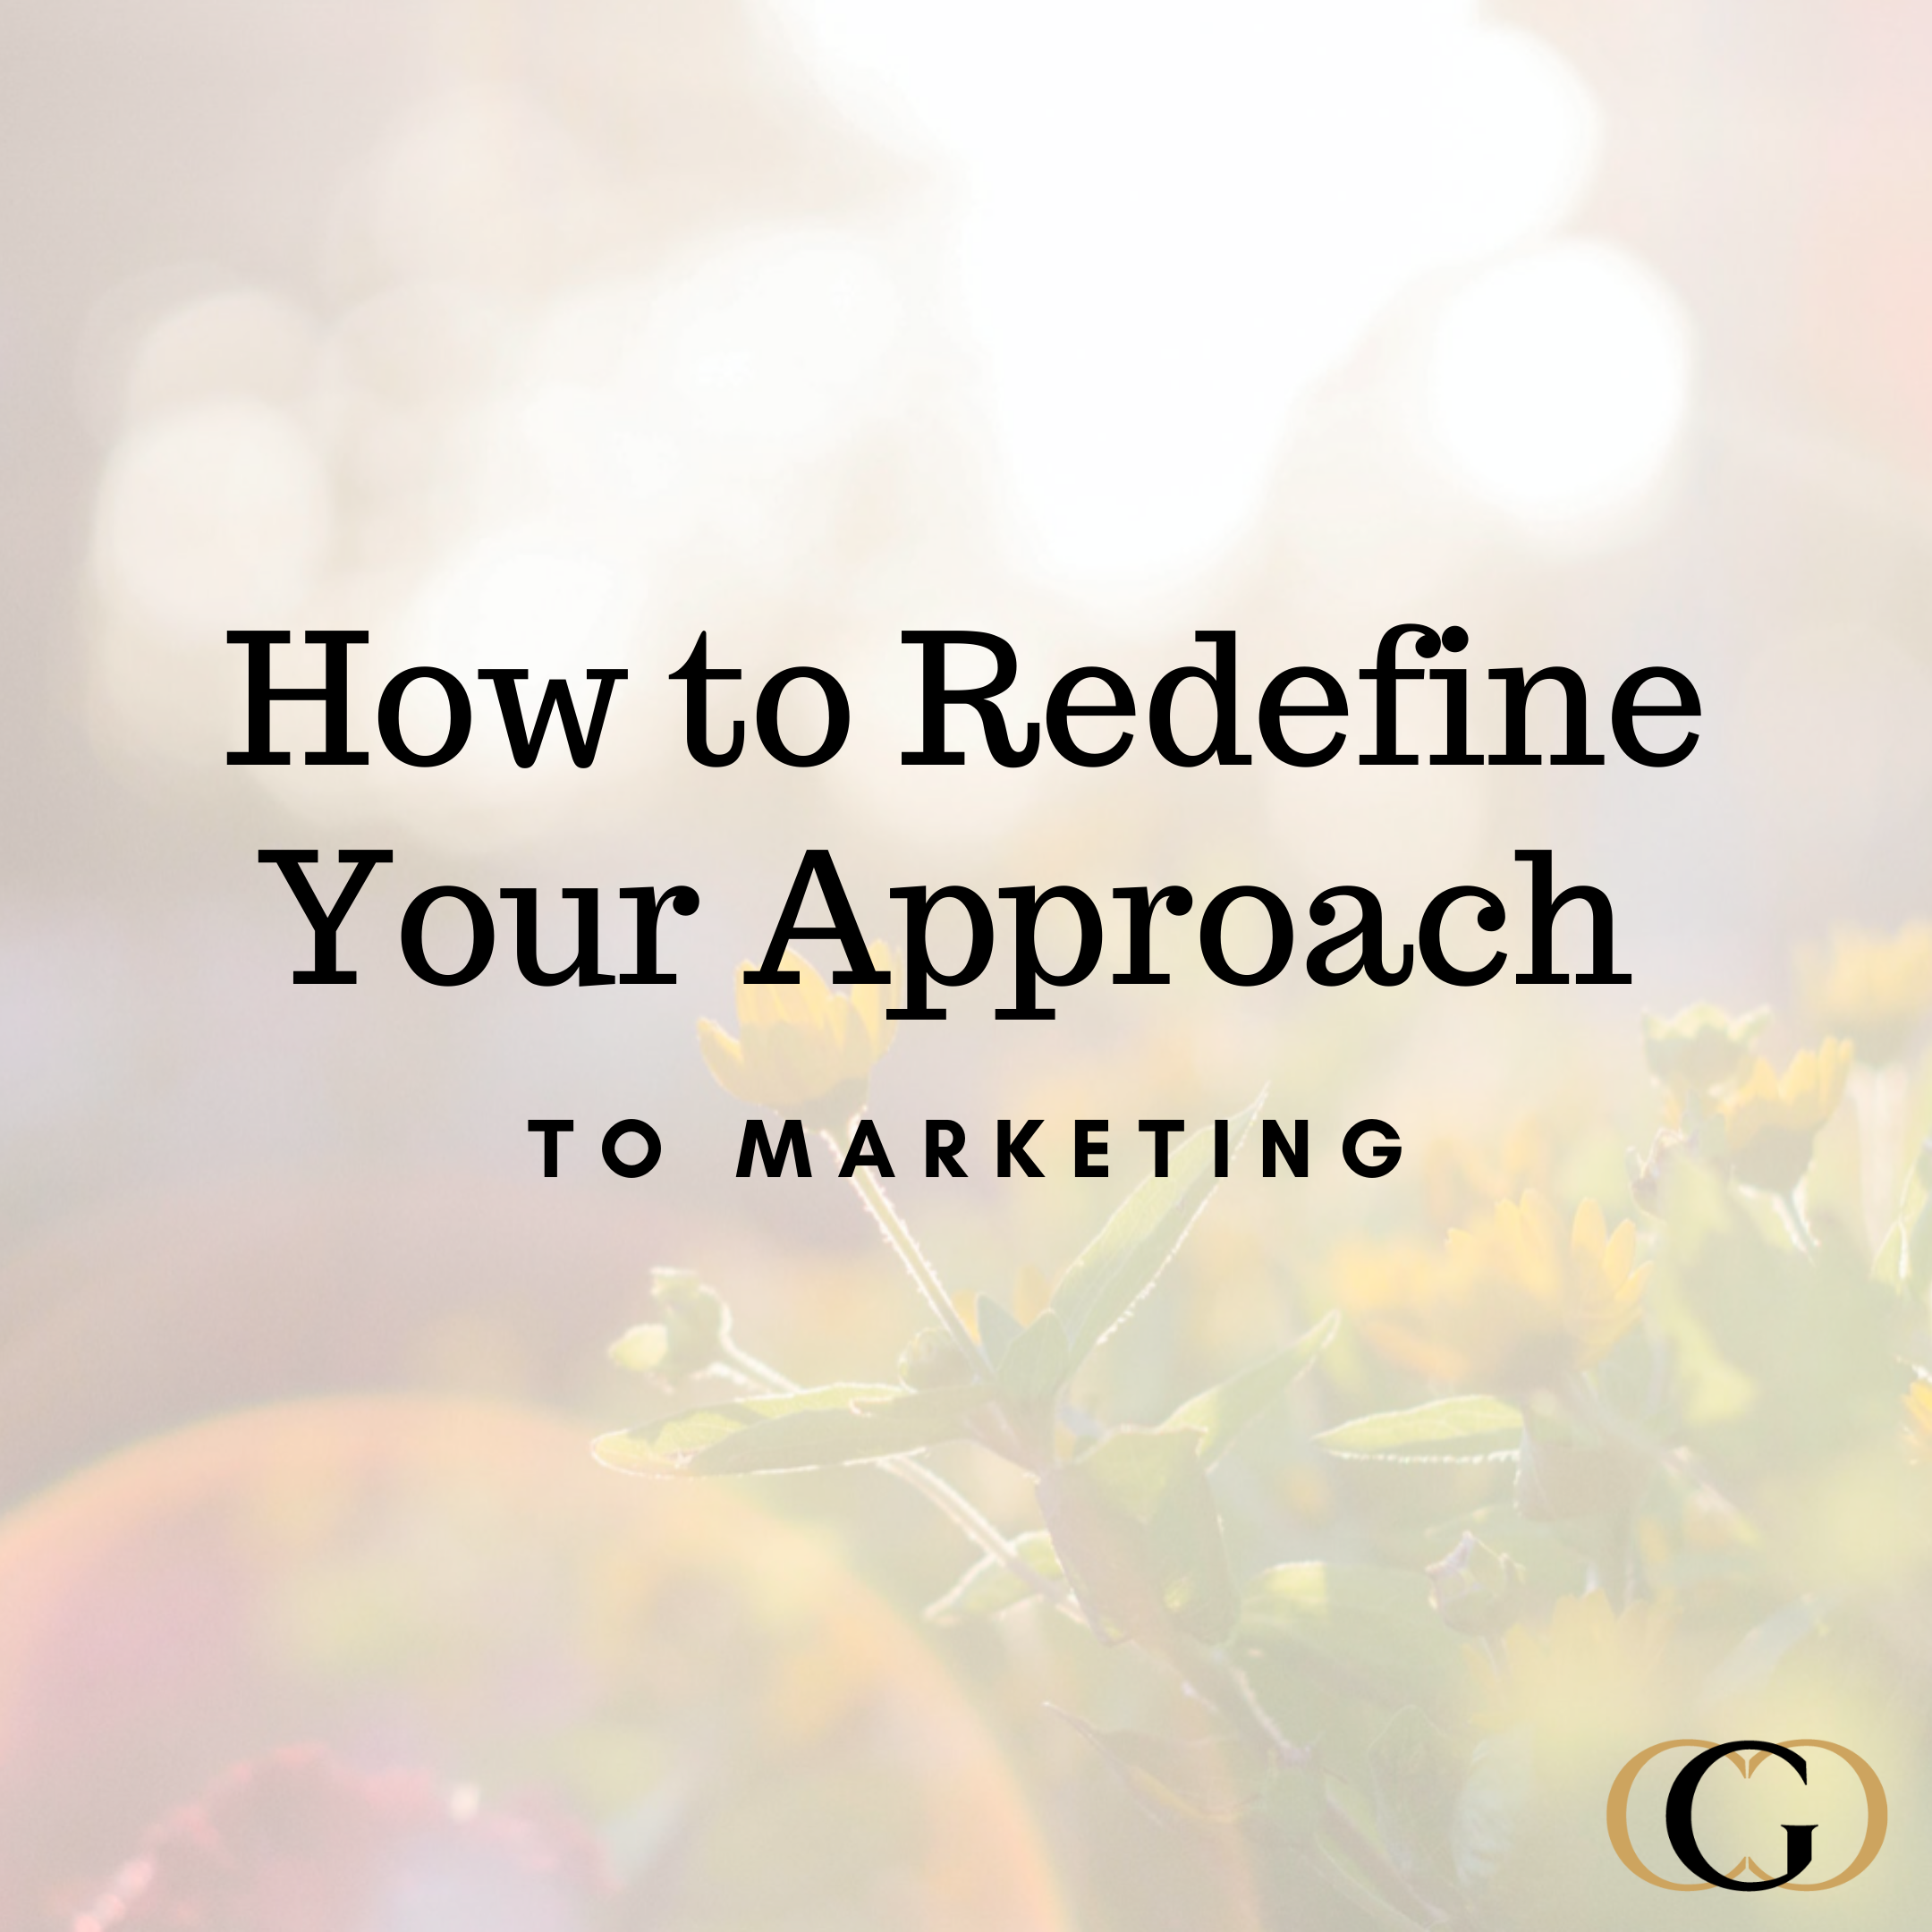 How to Redefine Your Approach to Marketing